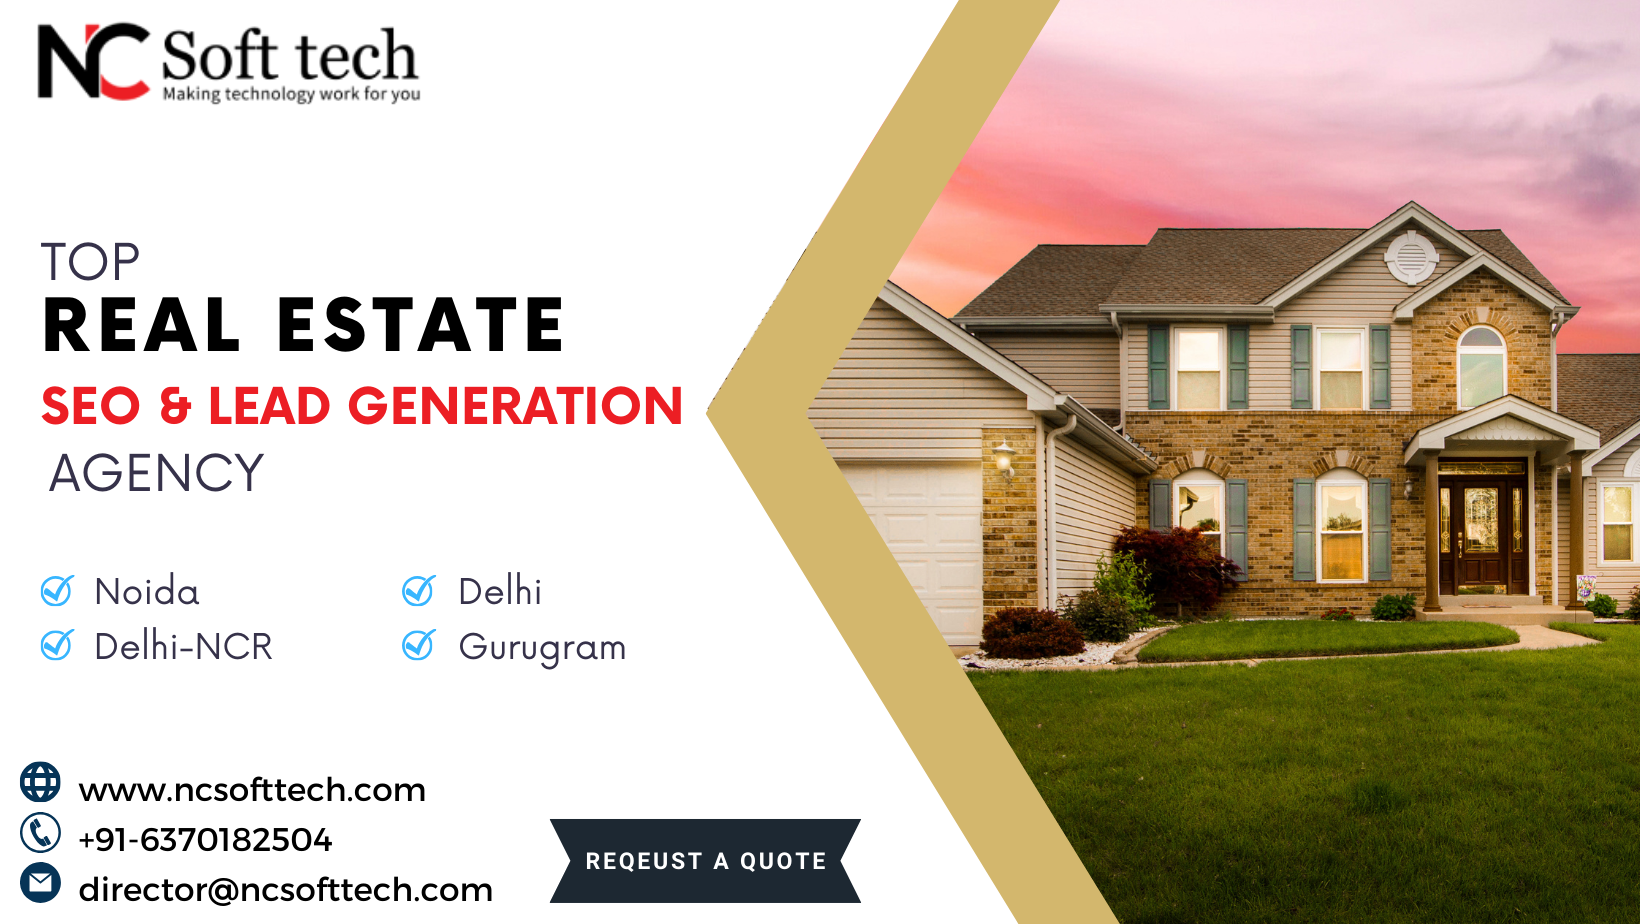 Unveiling the Top Real Estate SEO Company and Lead Generation Agency